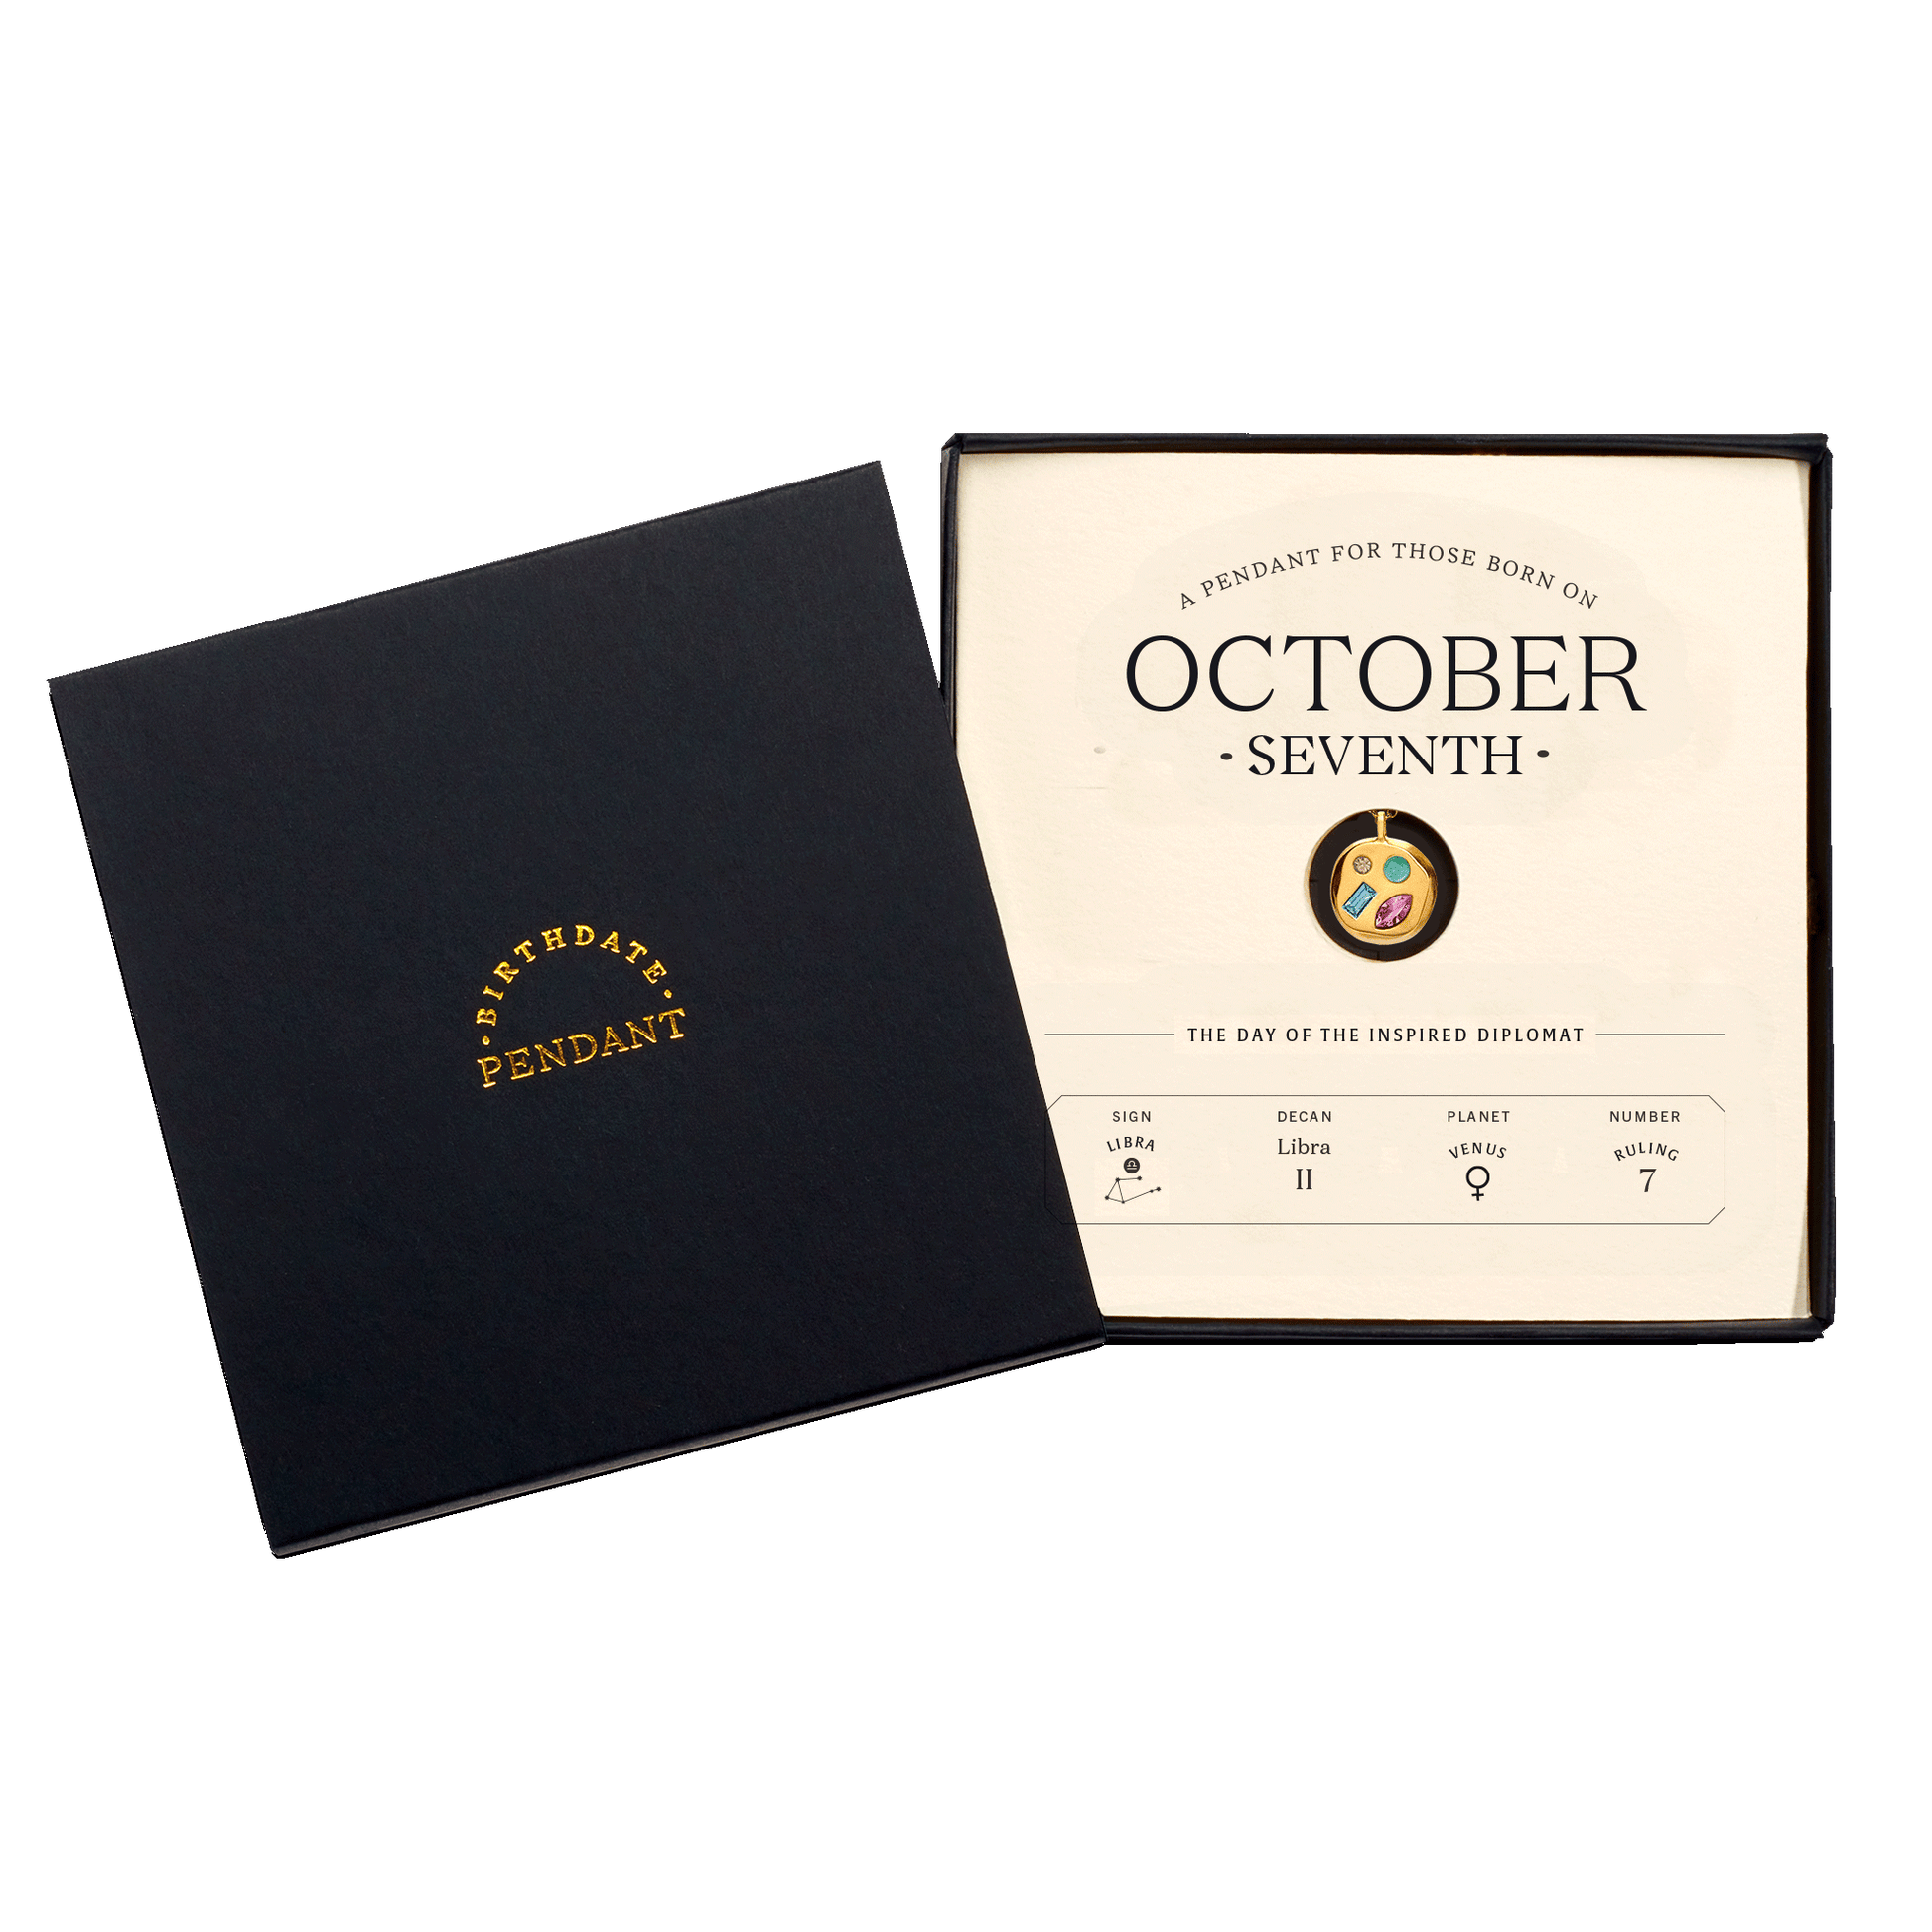 The October Seventh Pendant inside its box